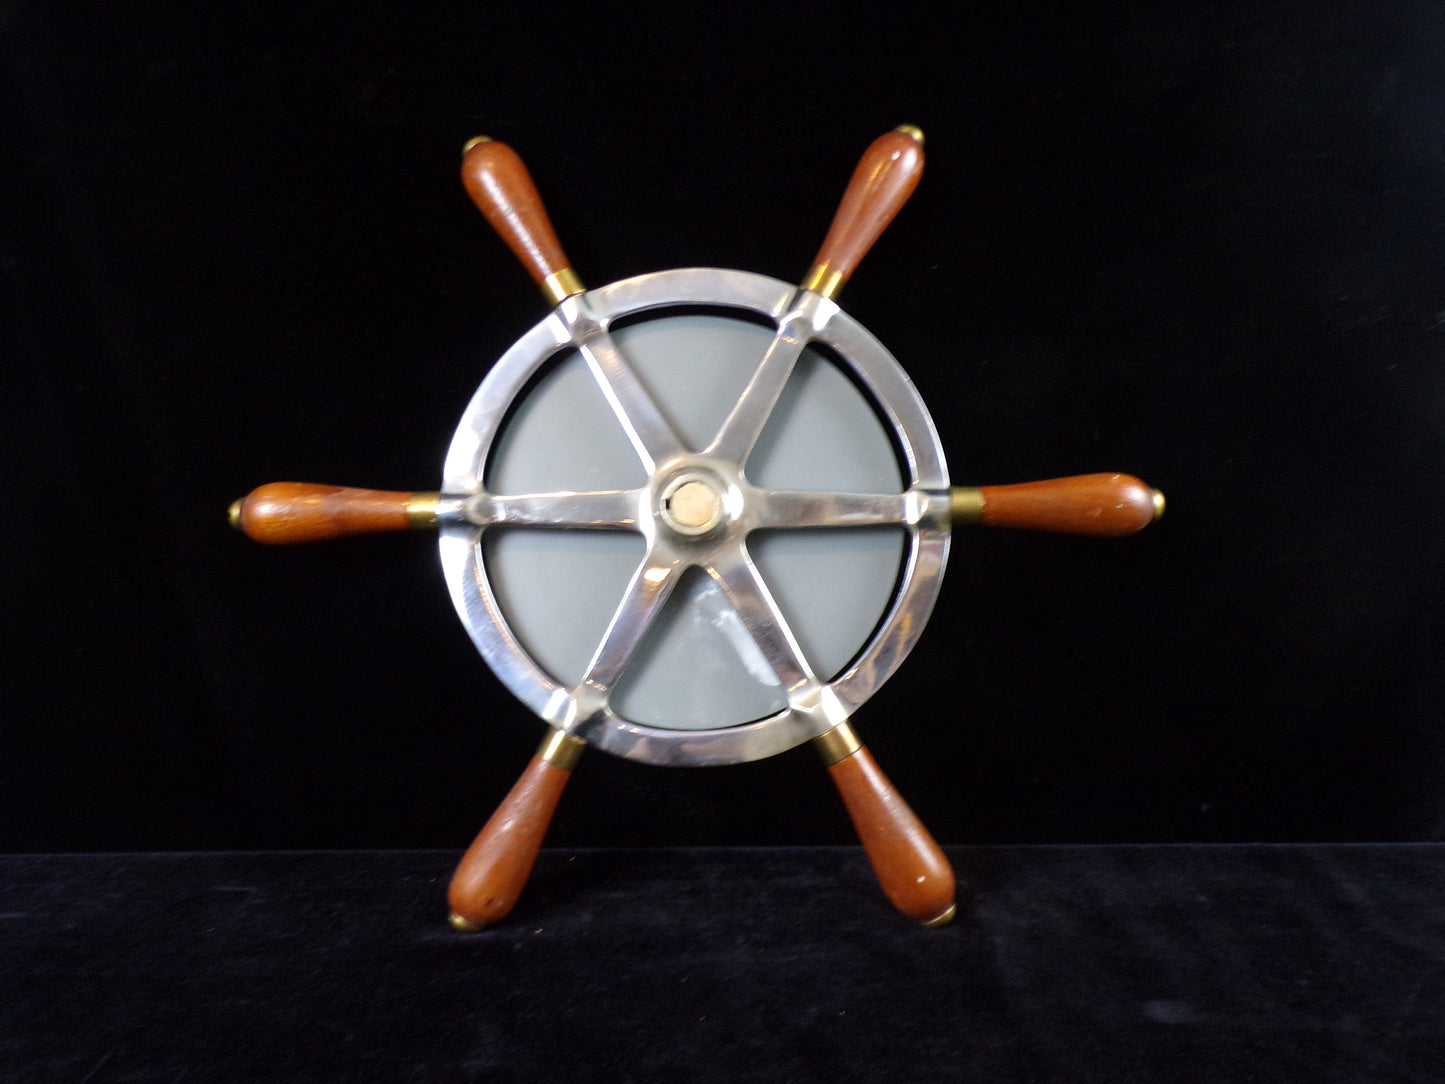 Ship Wheel, 17 1/4" Chrome Faced and Chrome Spokes with Six Wooden Spoke Handles